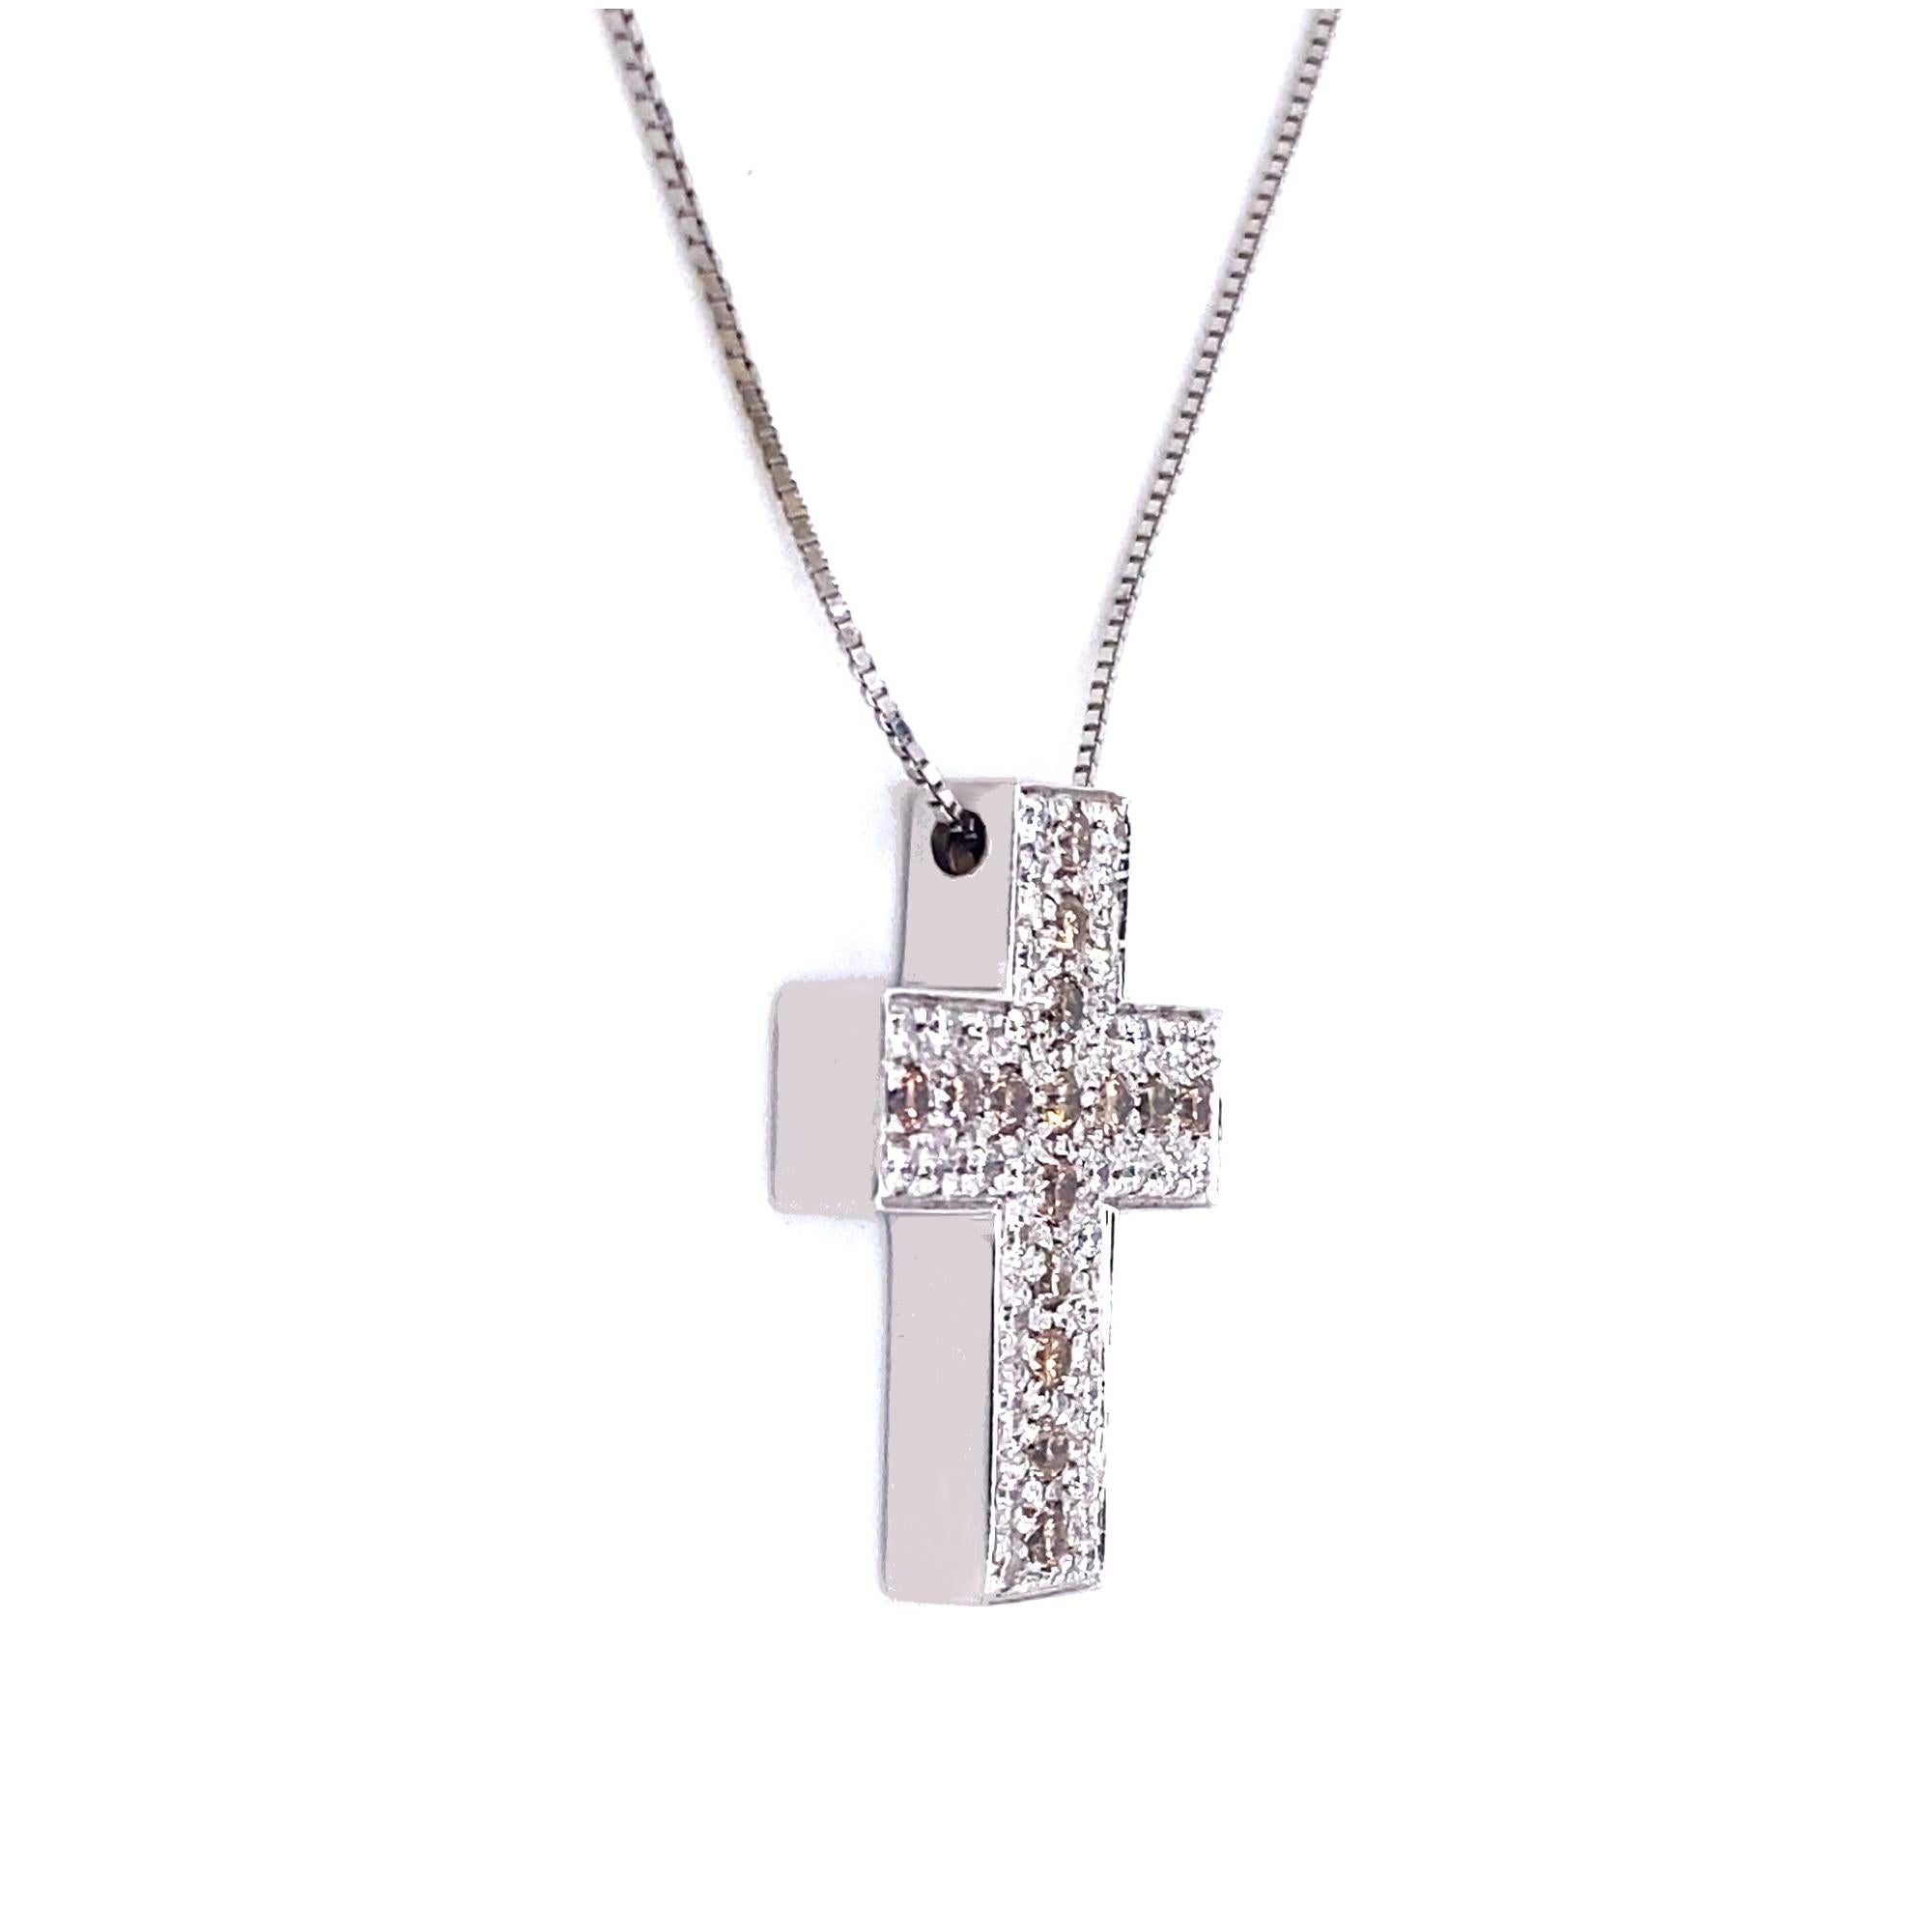 A beautiful contemporary cross with .7-carats of diamonds (F/G VVS) set in 18-karat white gold. The chain is a delicate 18-karat white gold. The pendant measures 1.9-centimetres across, and 2.3-centimetres long. 

Are you looking for a set? Our